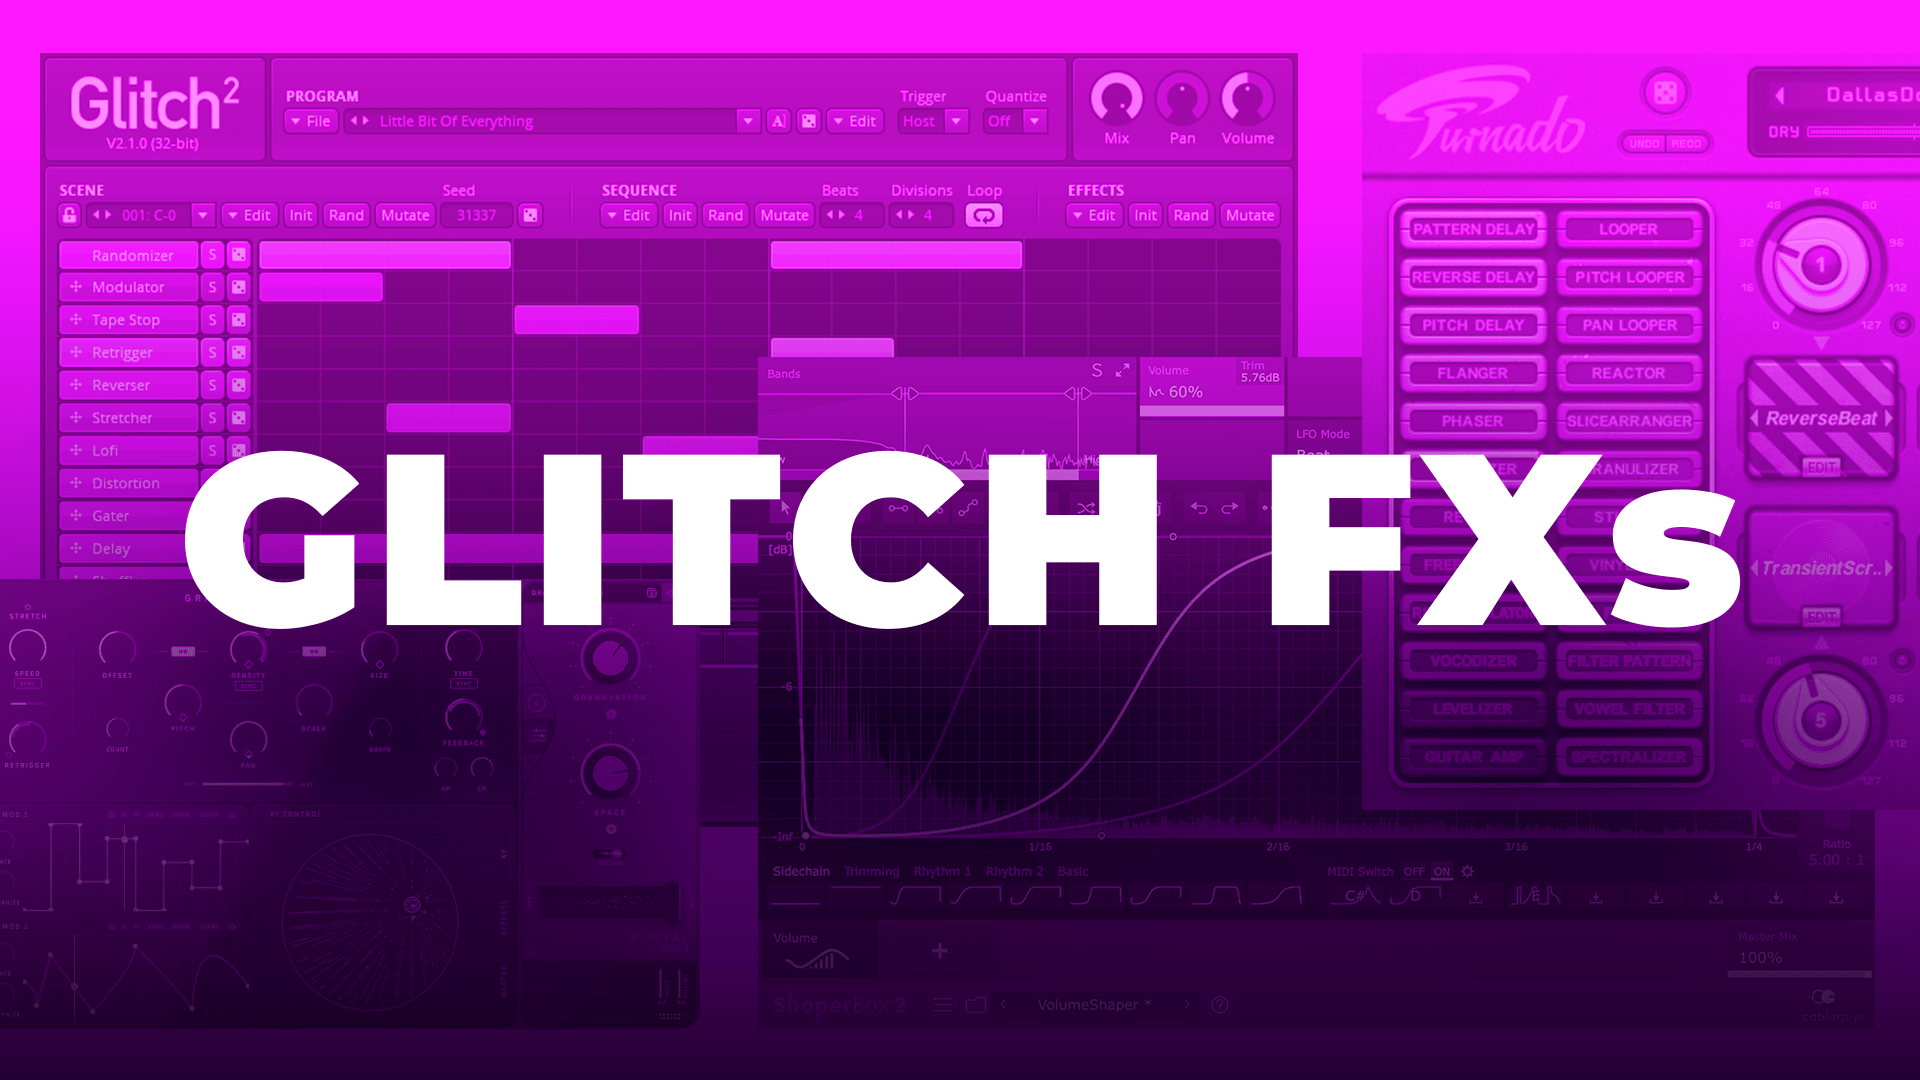 10 After Effects Glitch Plugins You Should Check Out